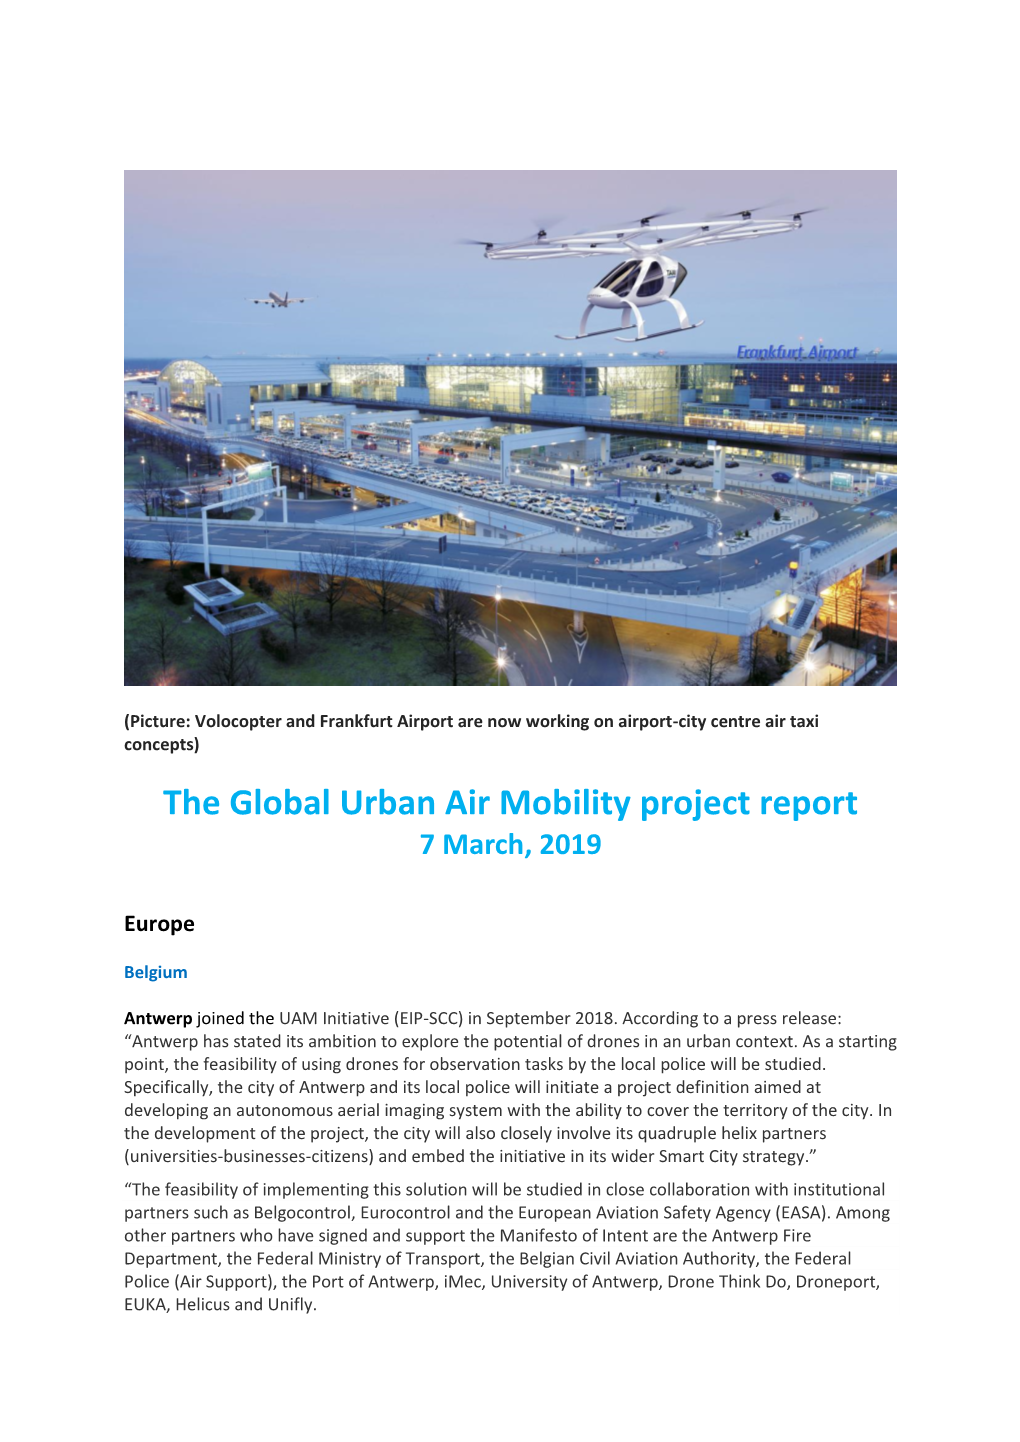 The Global Urban Air Mobility Project Report 7 March, 2019